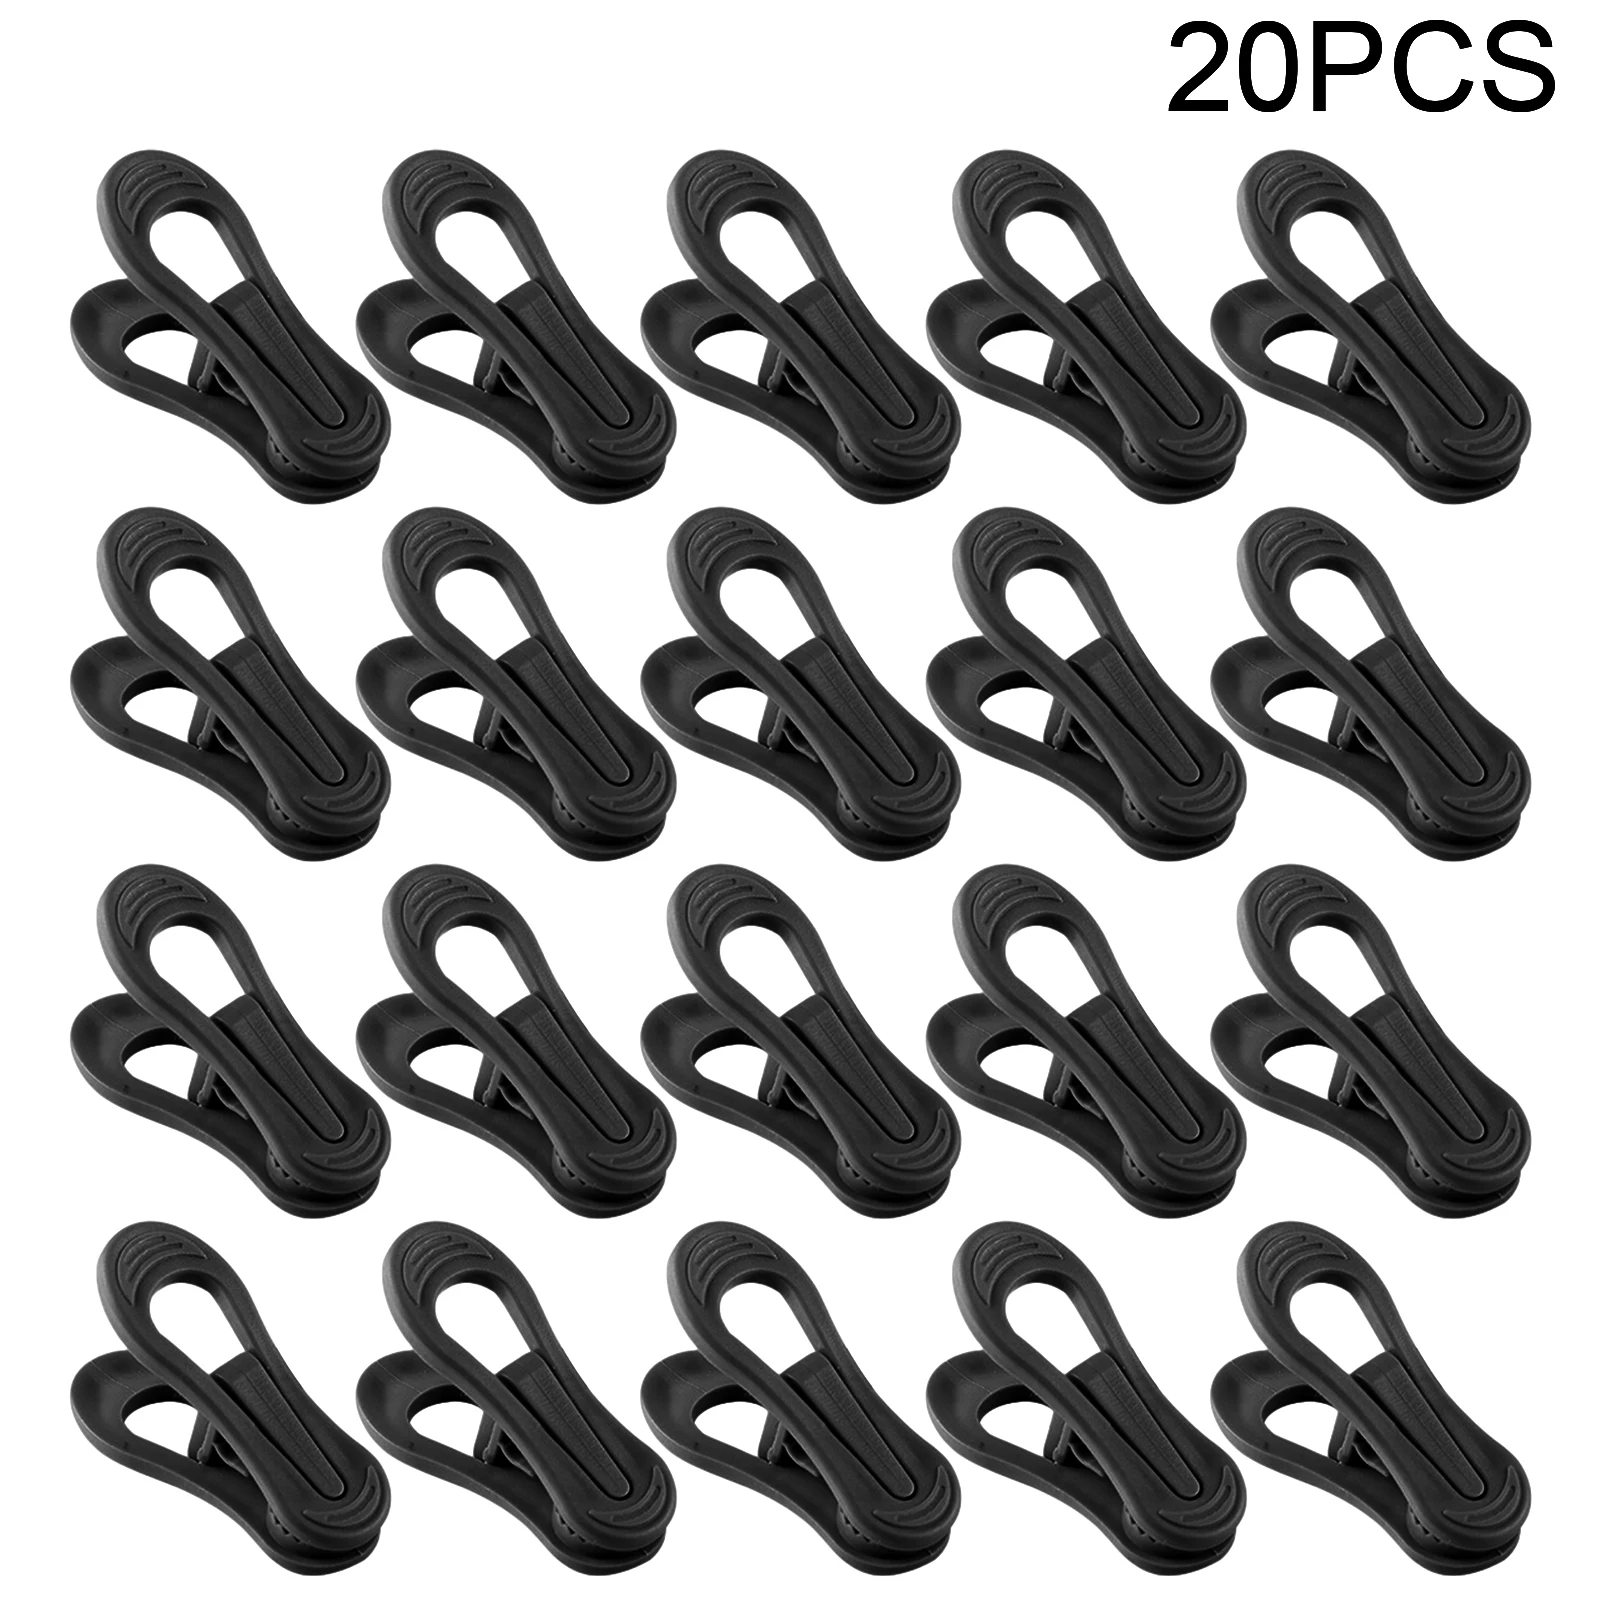 

20pcs Removable Anti Slip Drying Racks Small Windproof Reusable Portable Clothes Clip Coat For Hangers Skirt PP Home Strong Grip